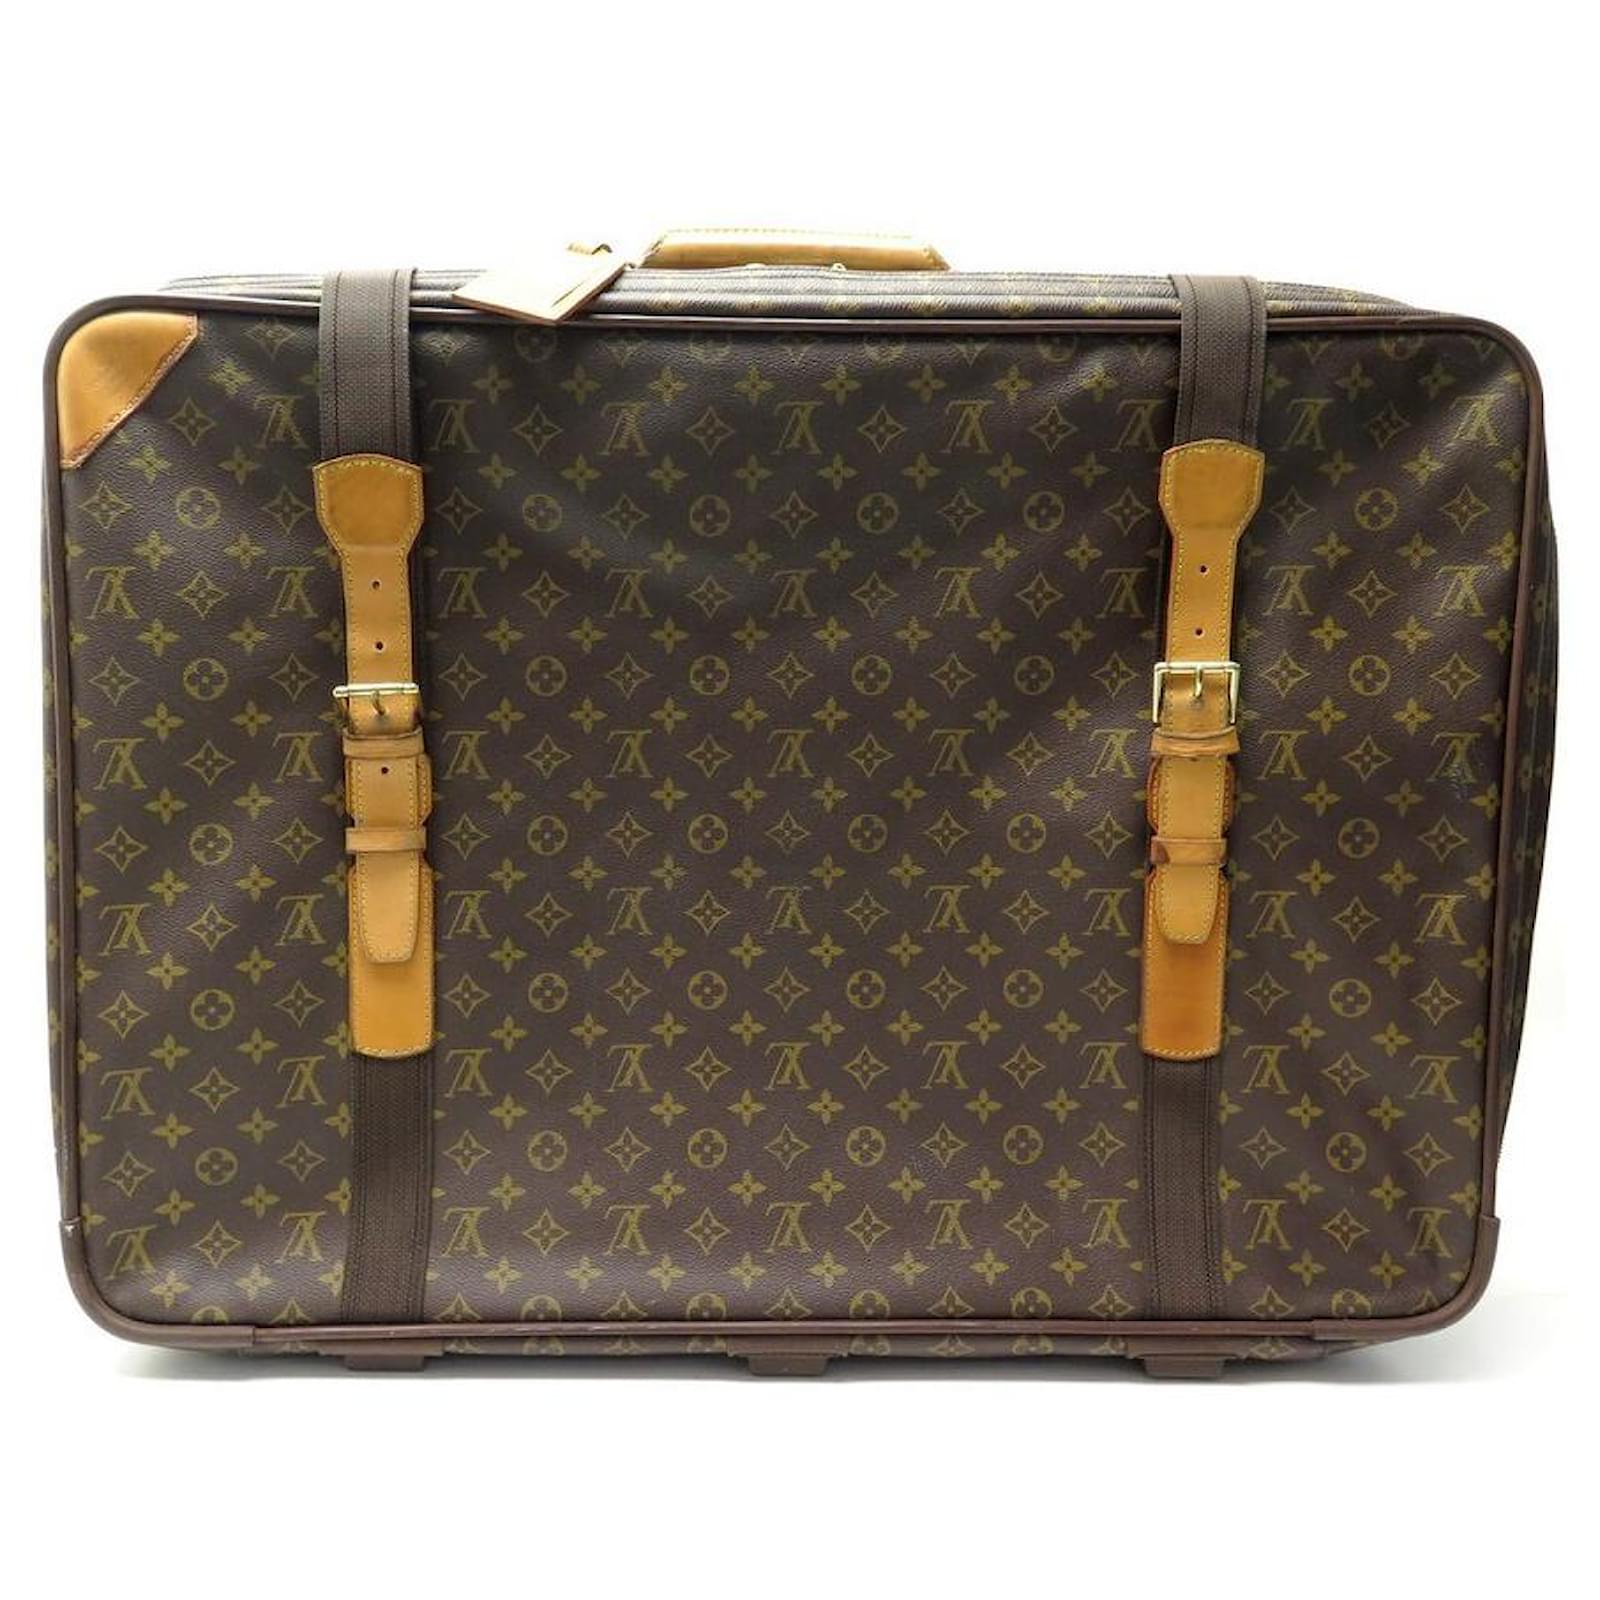 Vintage Louis Vuitton Natural Only One Available Leather Luggage